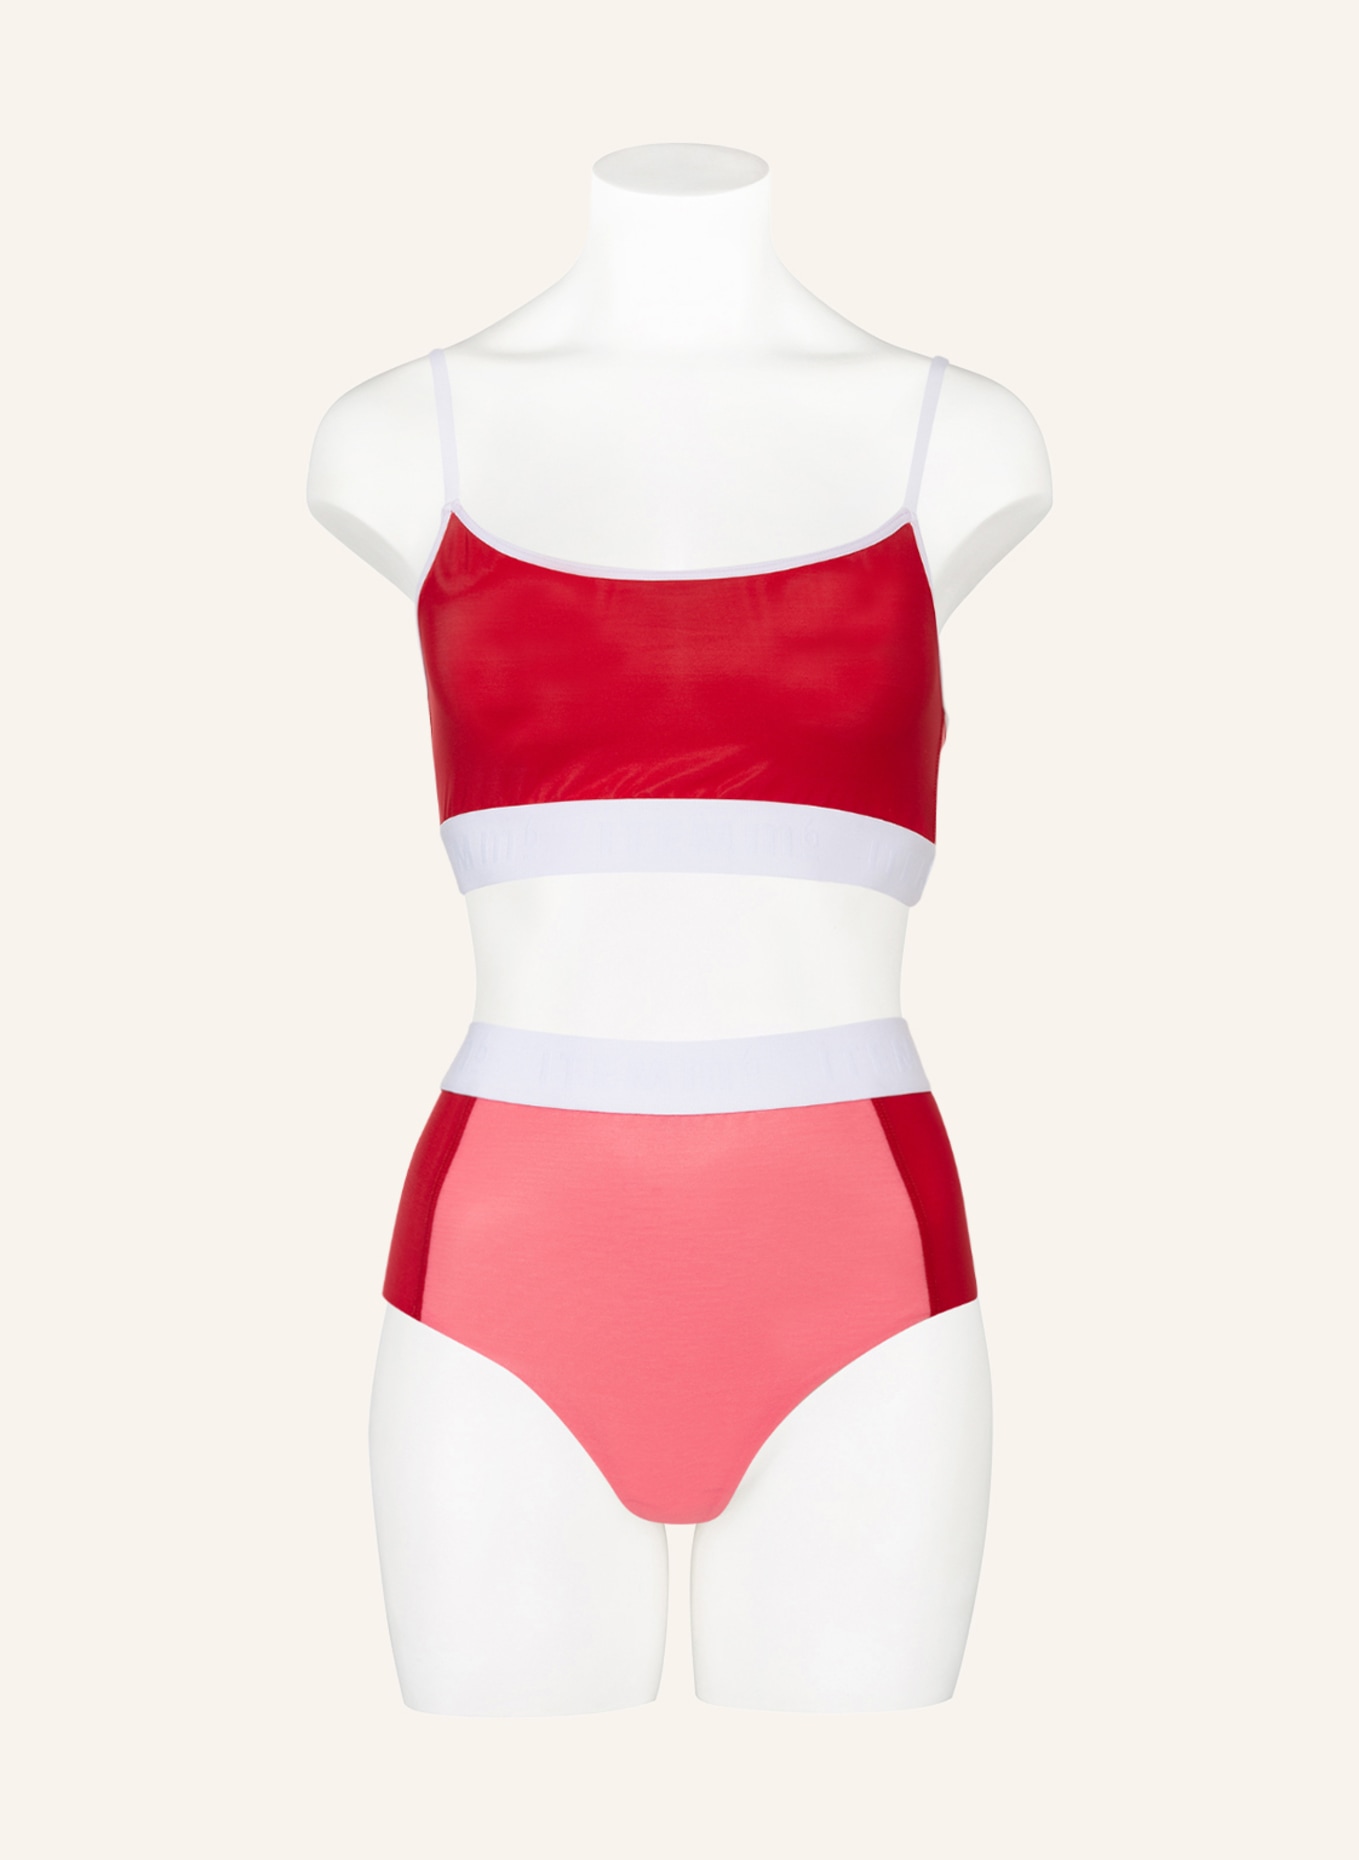 ITEM m6 Shaping briefs ALL MESH, Color: RED/ PINK (Image 2)